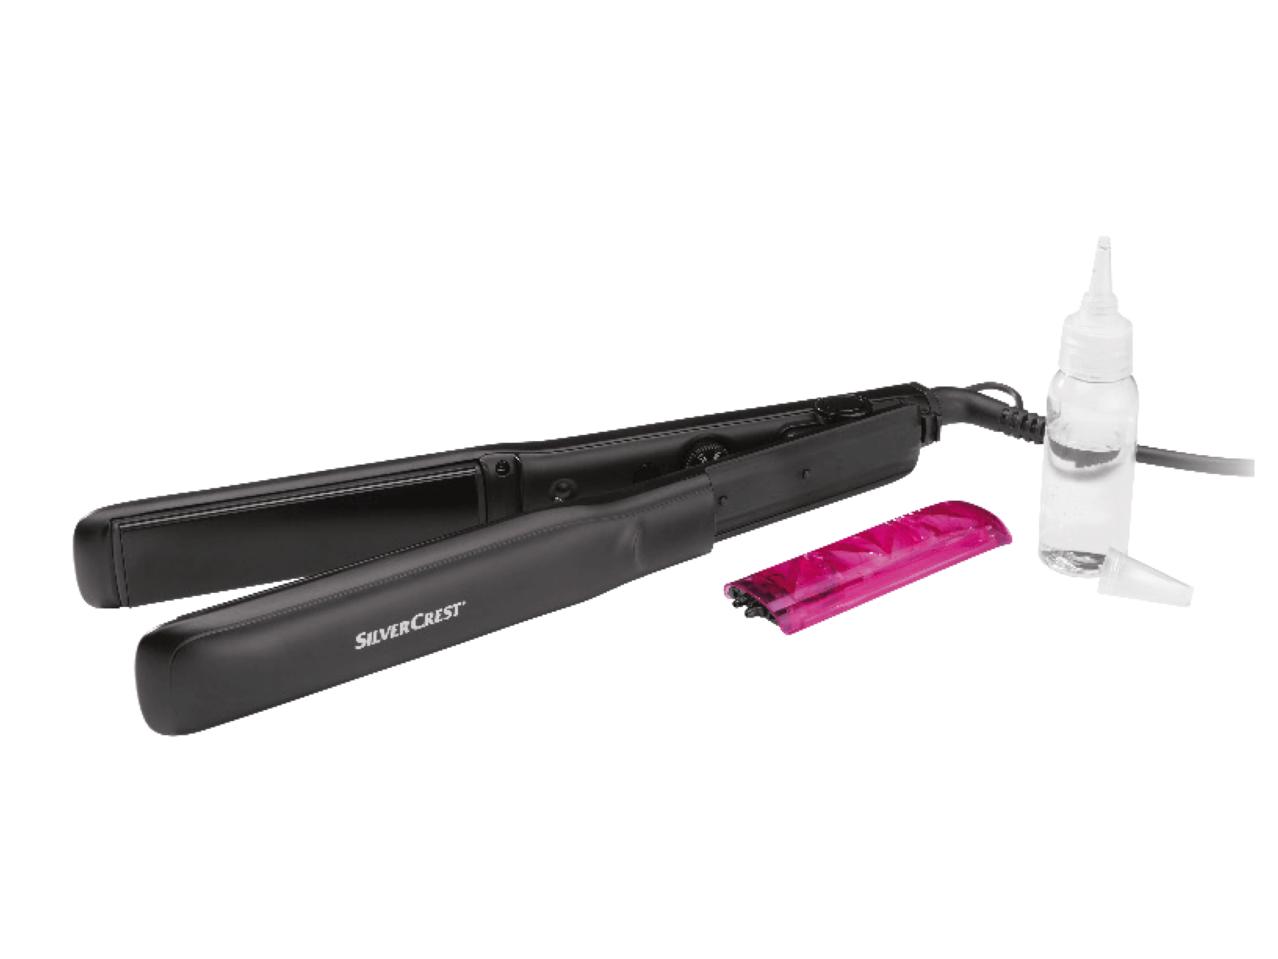 SILVERCREST PERSONAL CARE 52W Hair Straightener with Steam Function